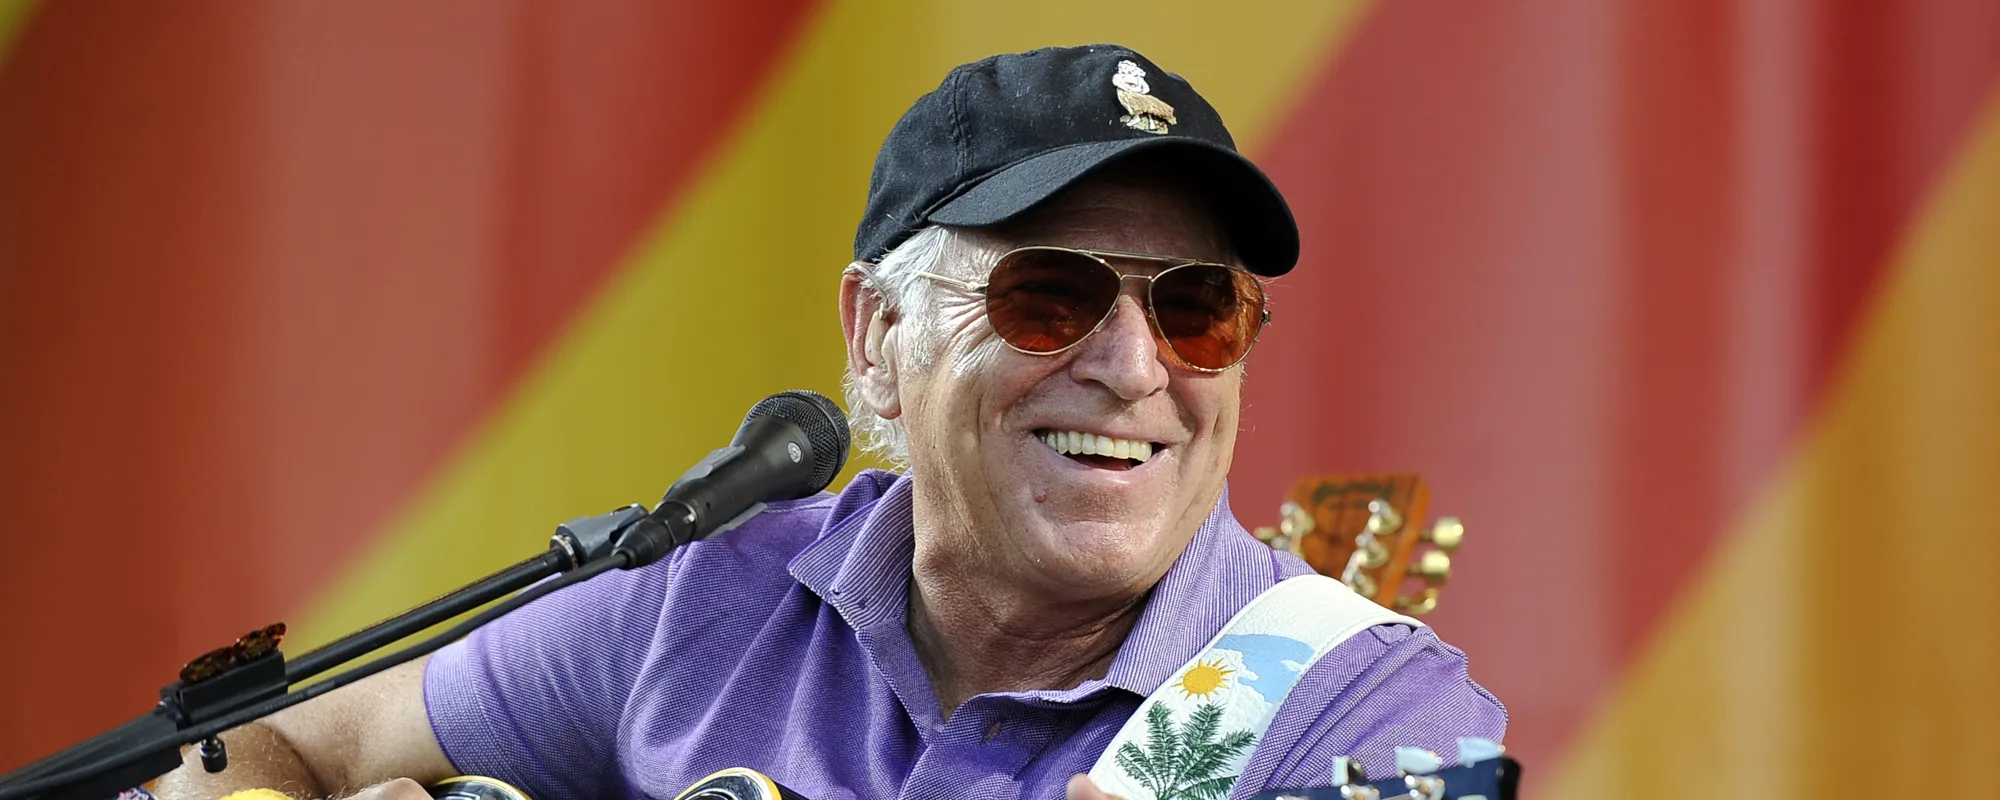 Jimmy Buffett’s Son Speaks Out on Father’s Death: “I Miss Him So Much”